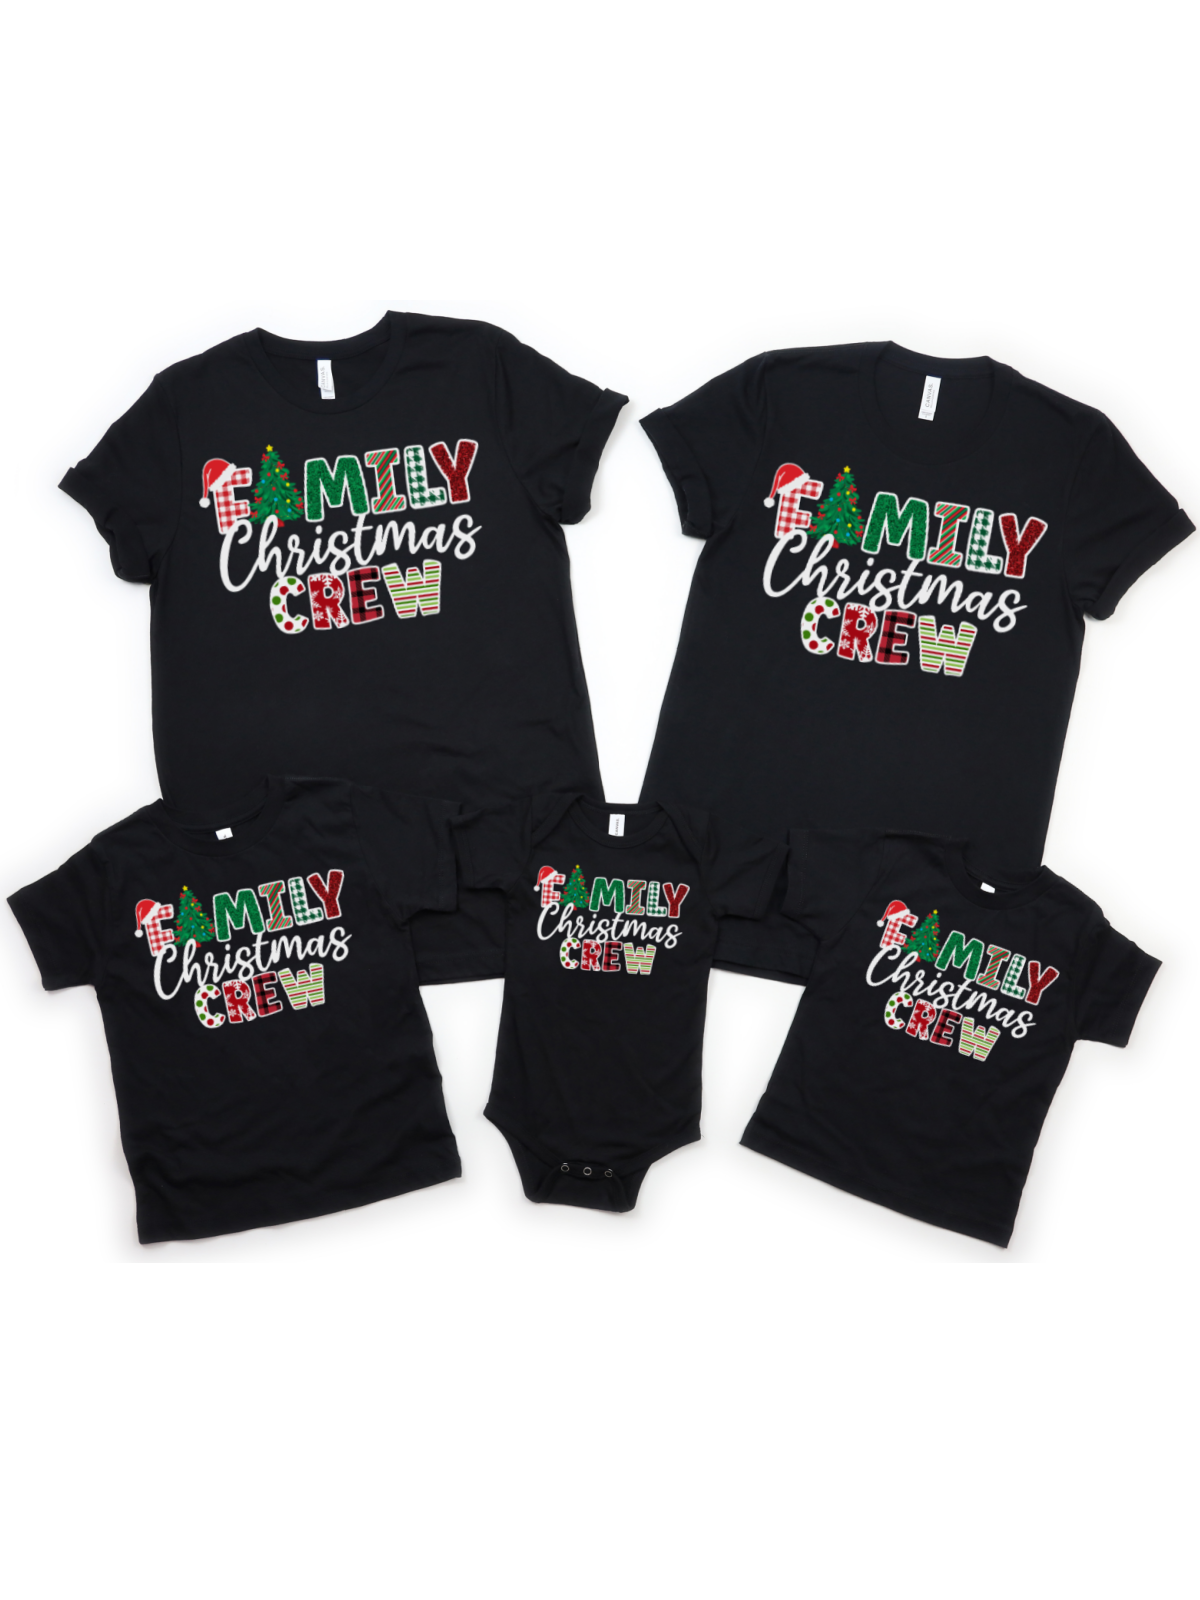 Family Christmas Crew Matching Holiday Shirts in Black